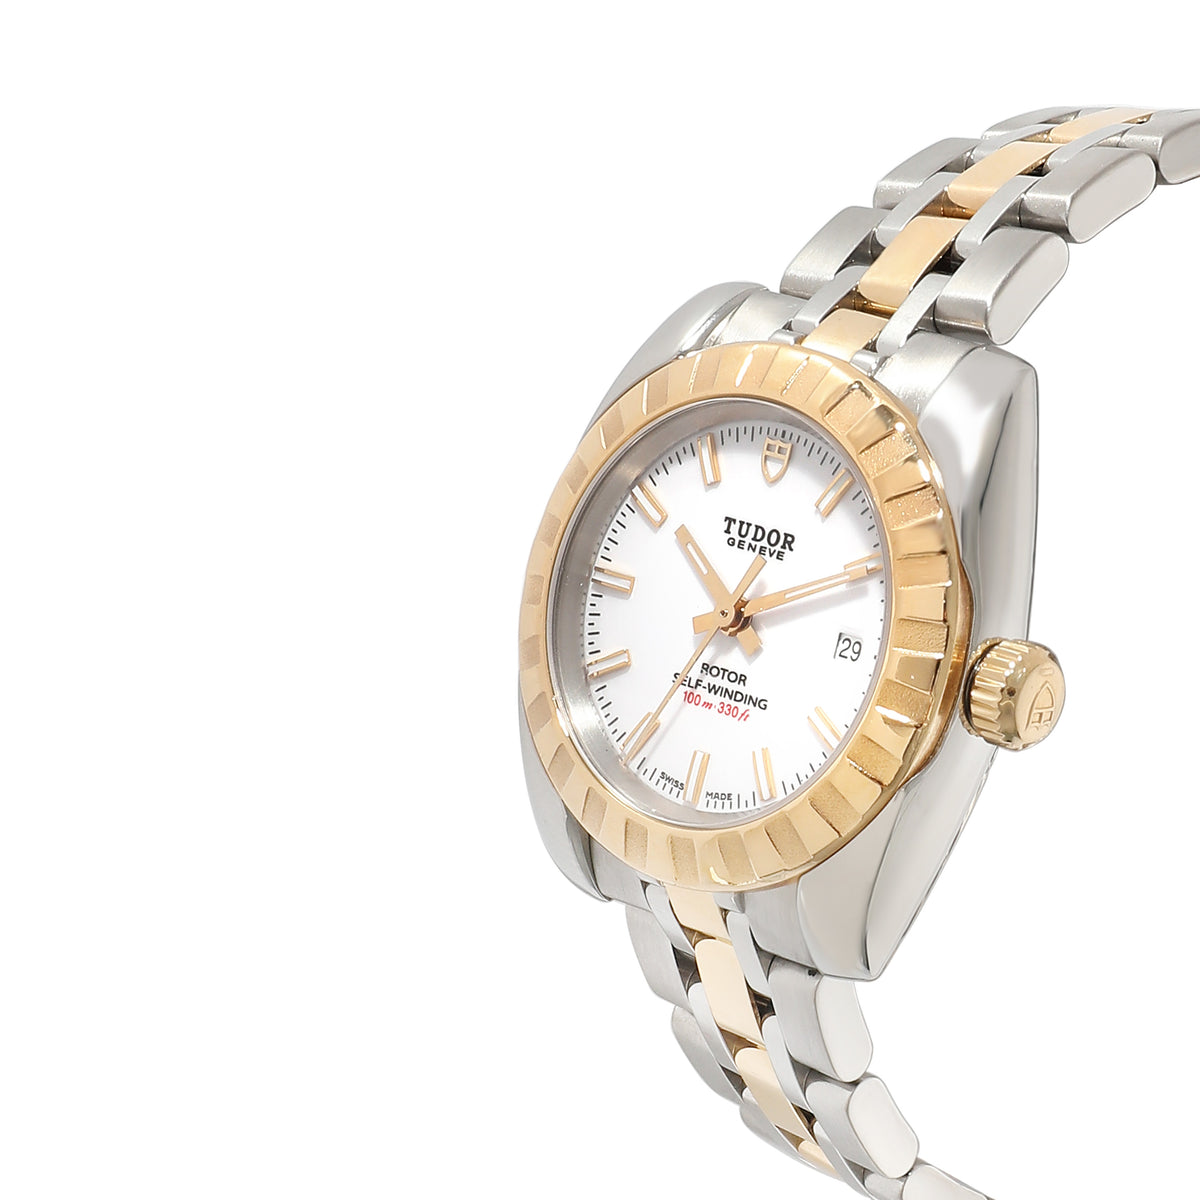 Tudor Classic 22013 Women's Watch in 18kt Stainless Steel/Yellow Gold